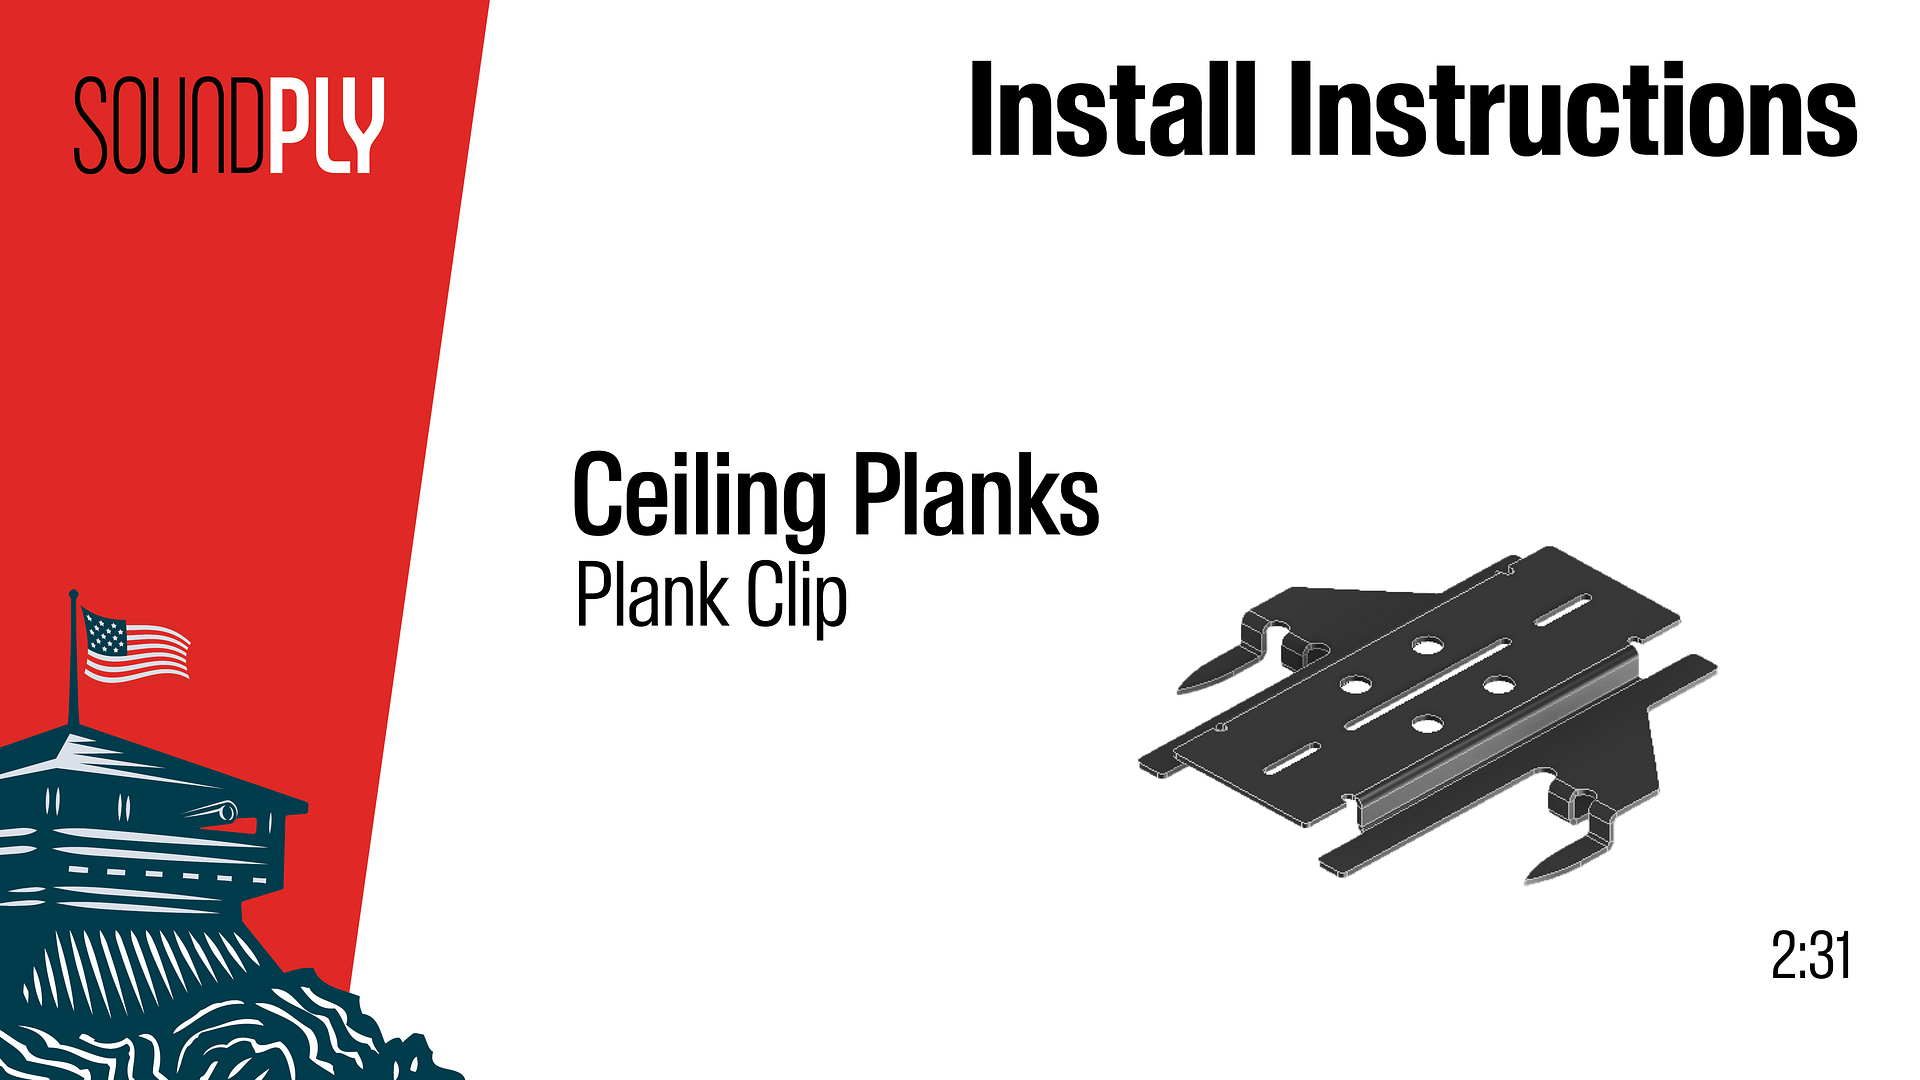 Ceiling Planks to Grid